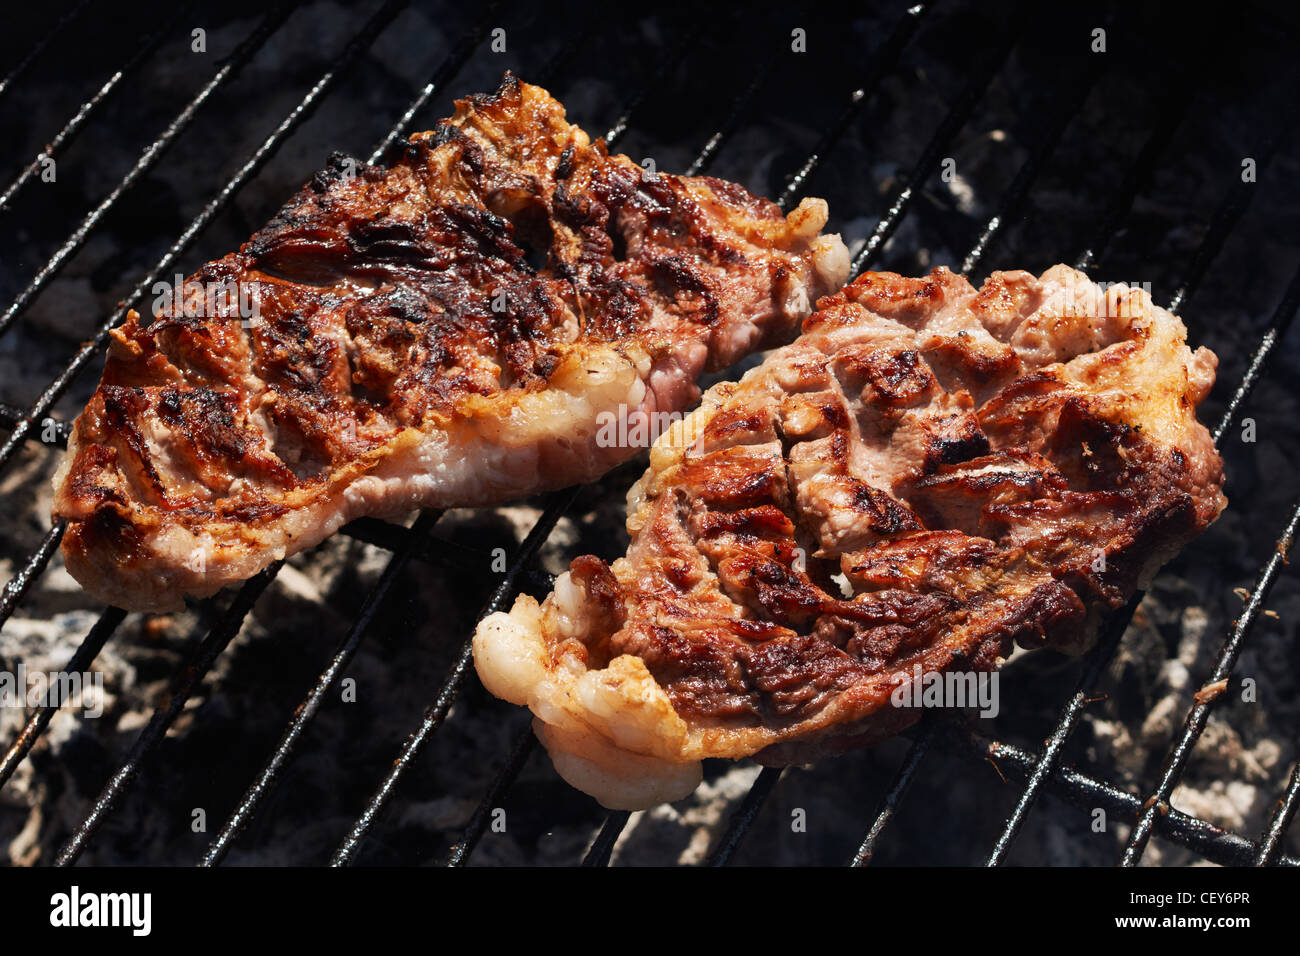 Pork-chop roasted on charcoal barbecue Stock Photo